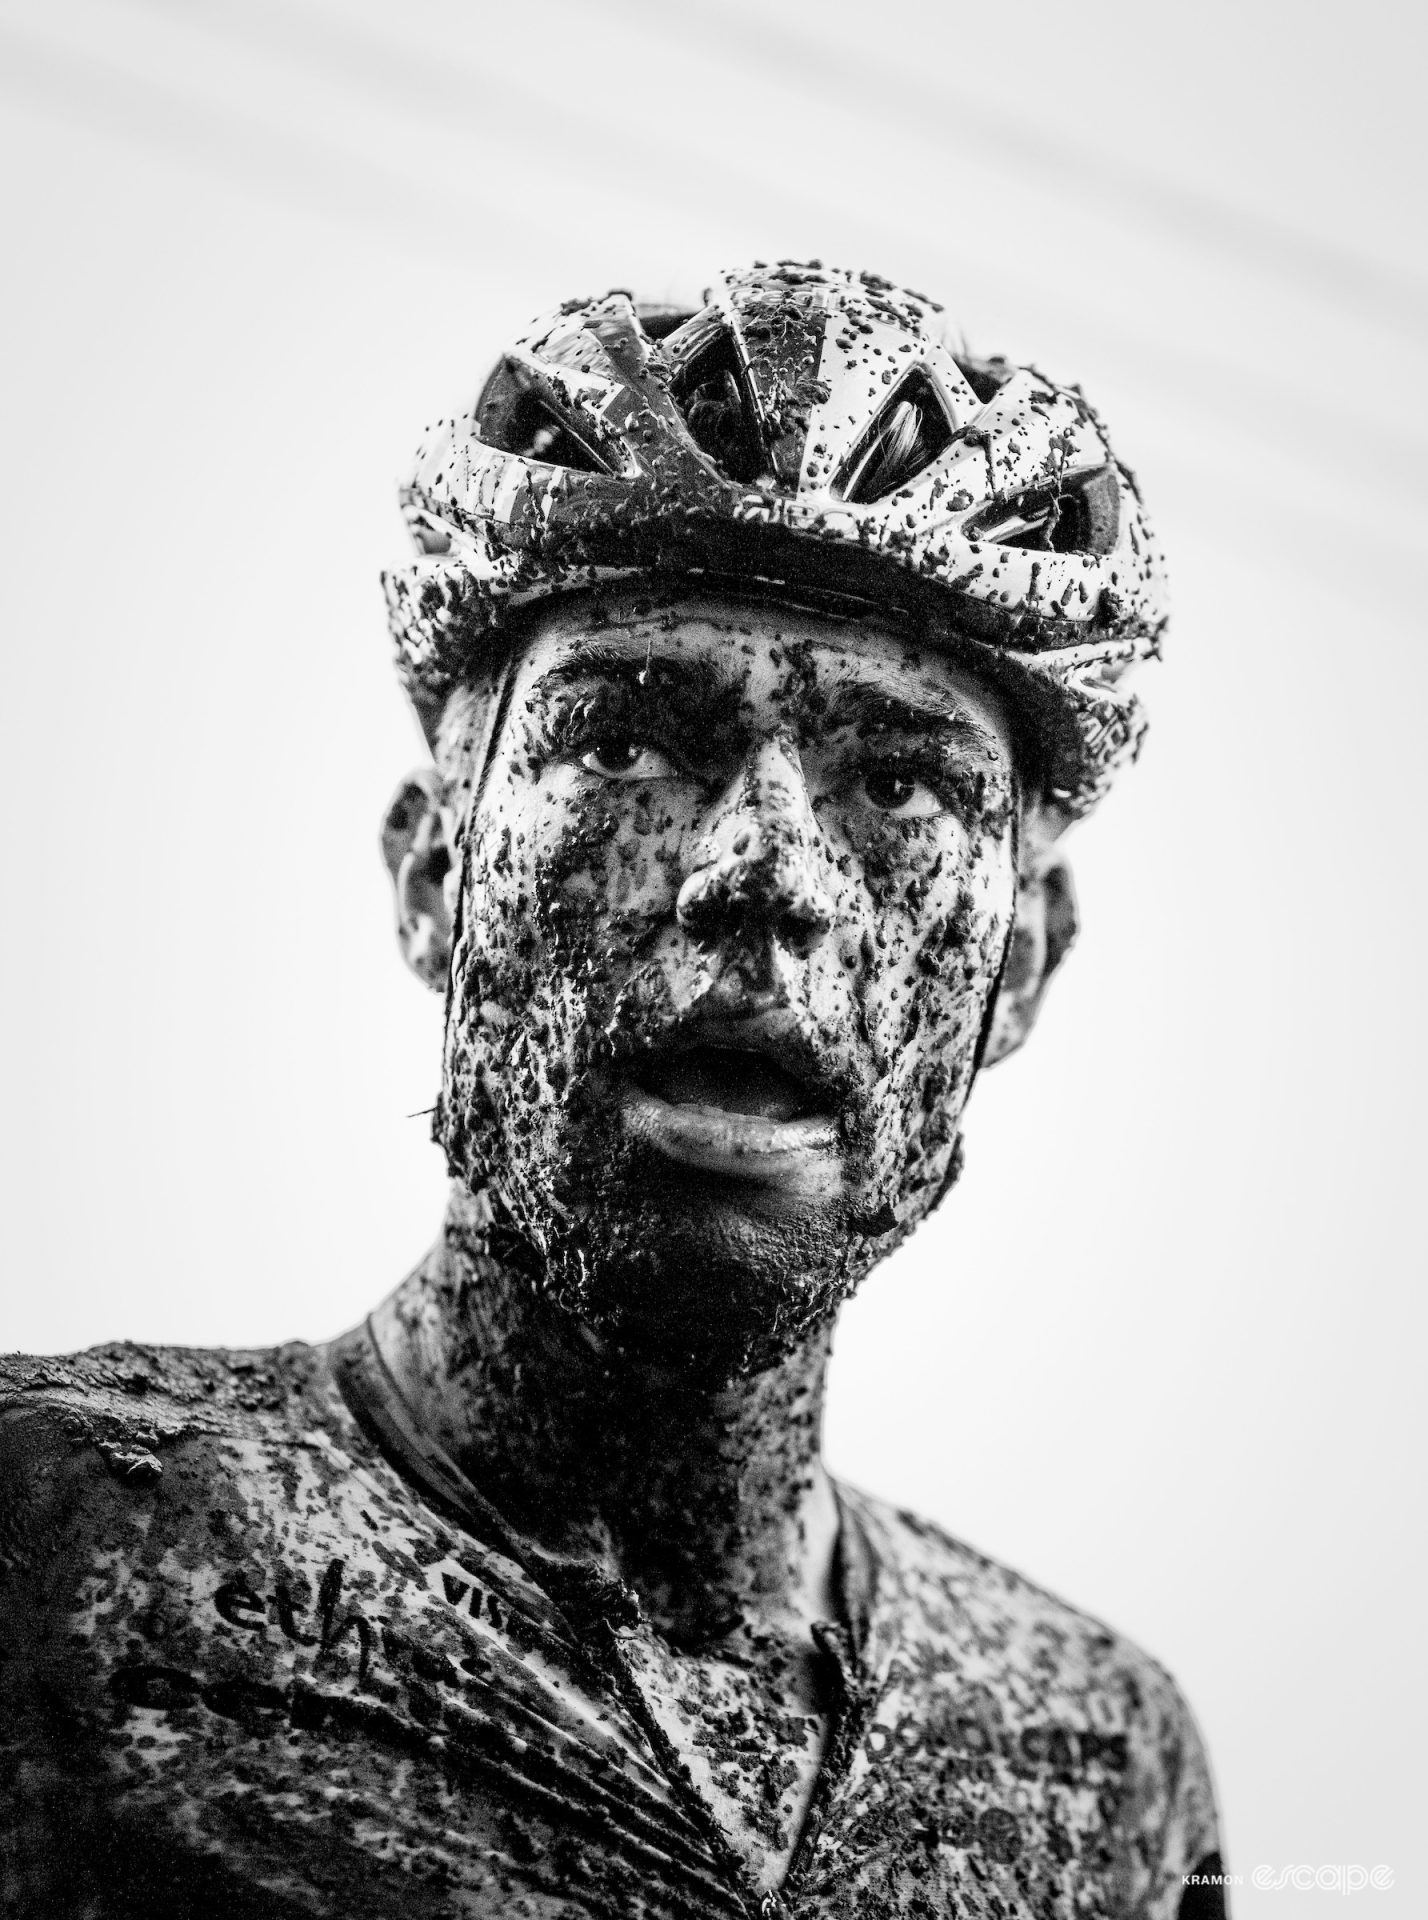 Black and white profile of Wout van Aert, covered in mud, after finishing second at the GP Sven Nys, X2O Trofee Baal.